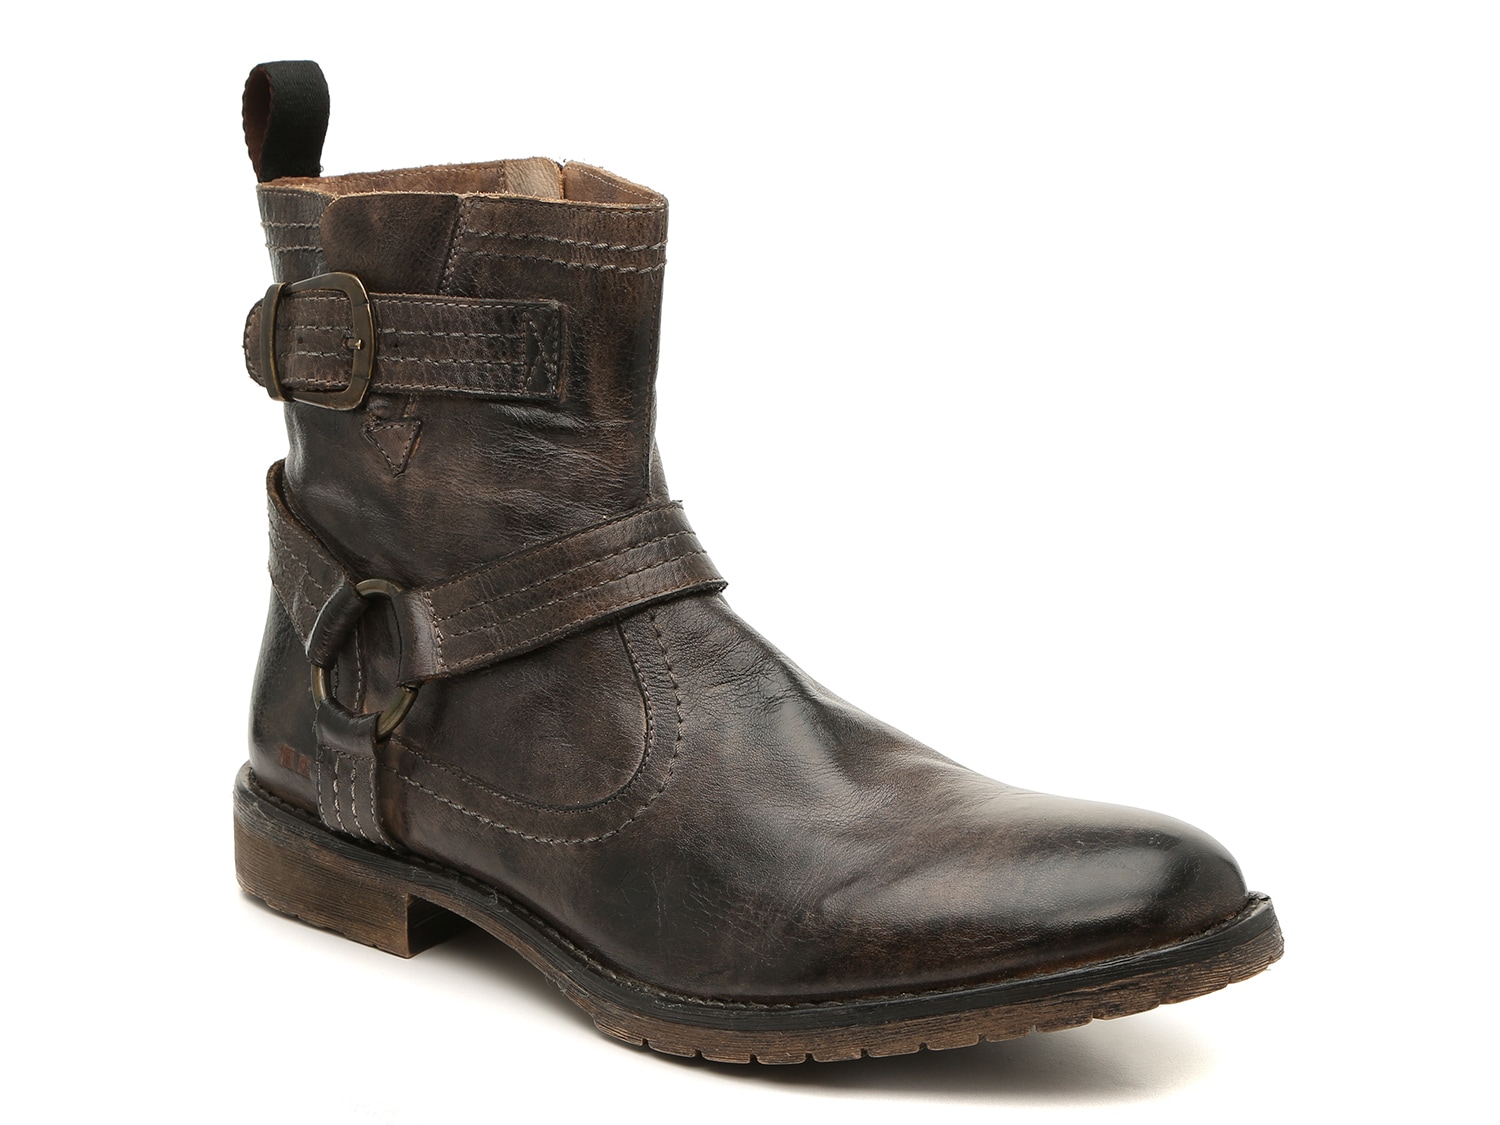 bed stu women's boots clearance